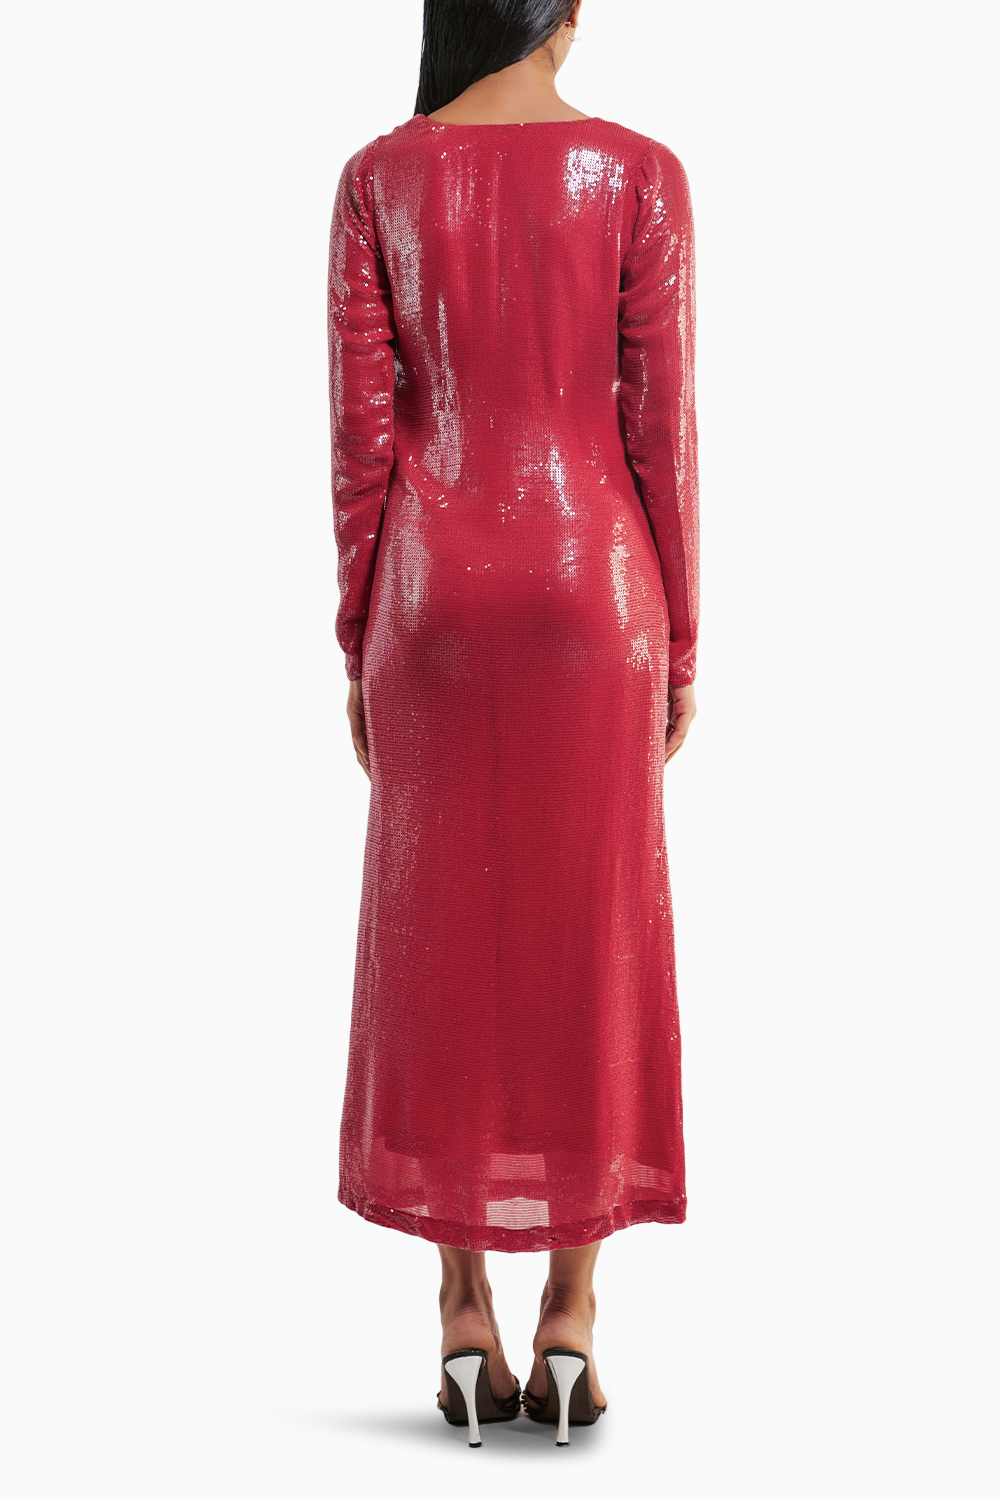 Marria Red  Dress